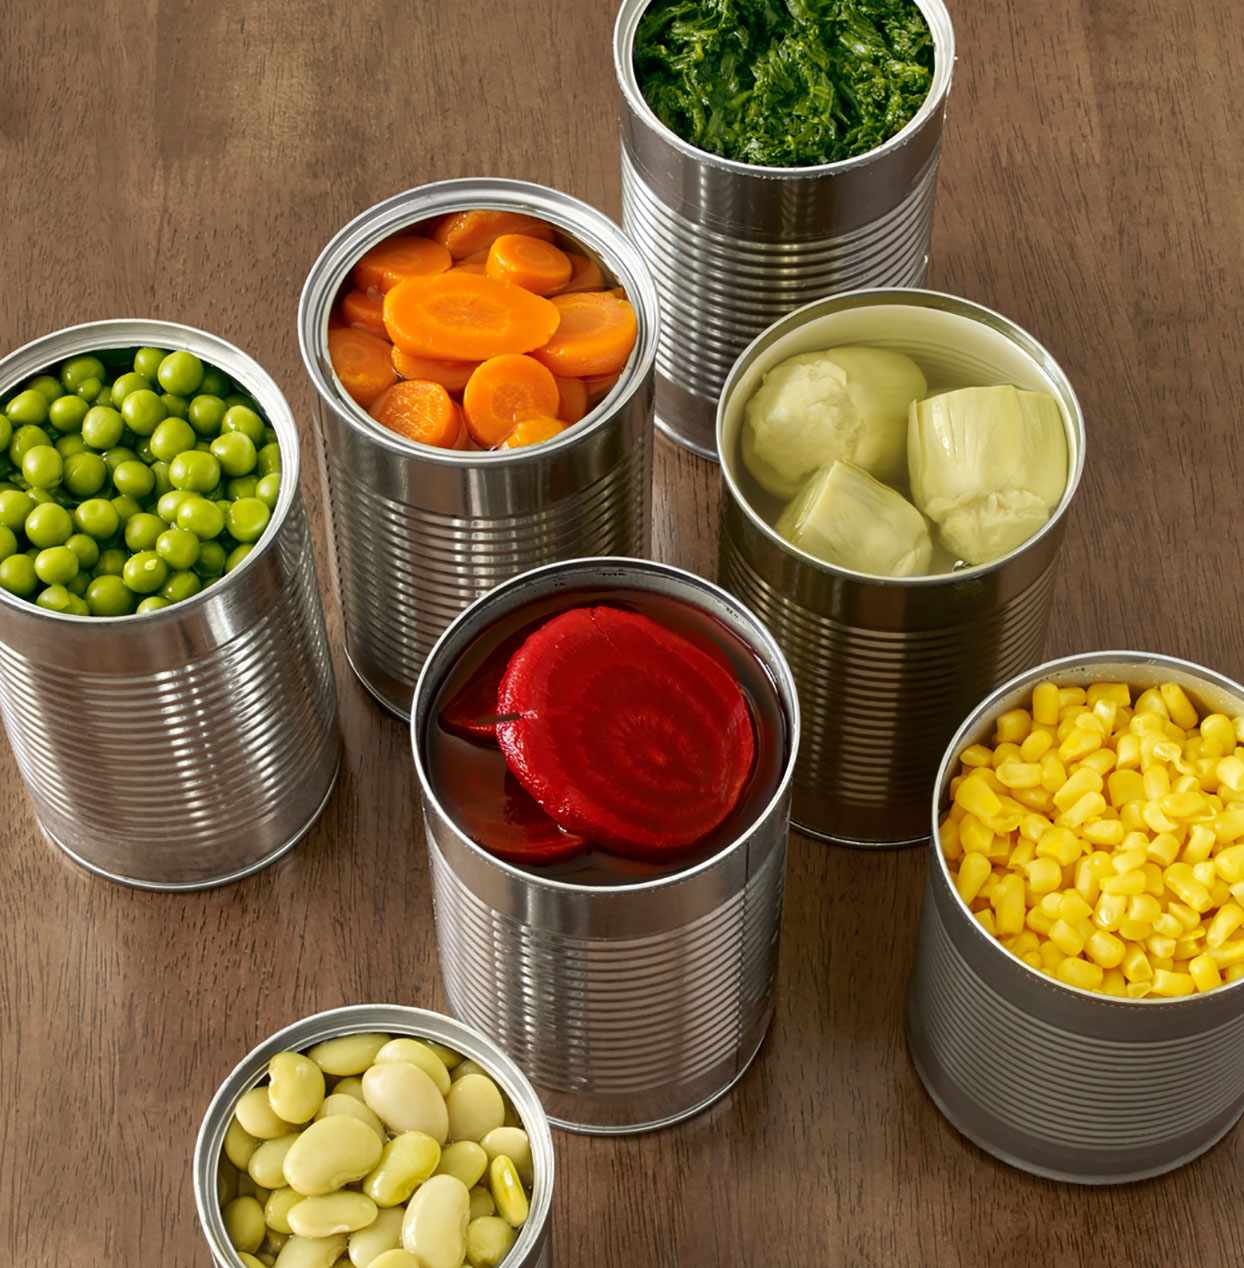 The Top 5 Canned Veggies, Ranked